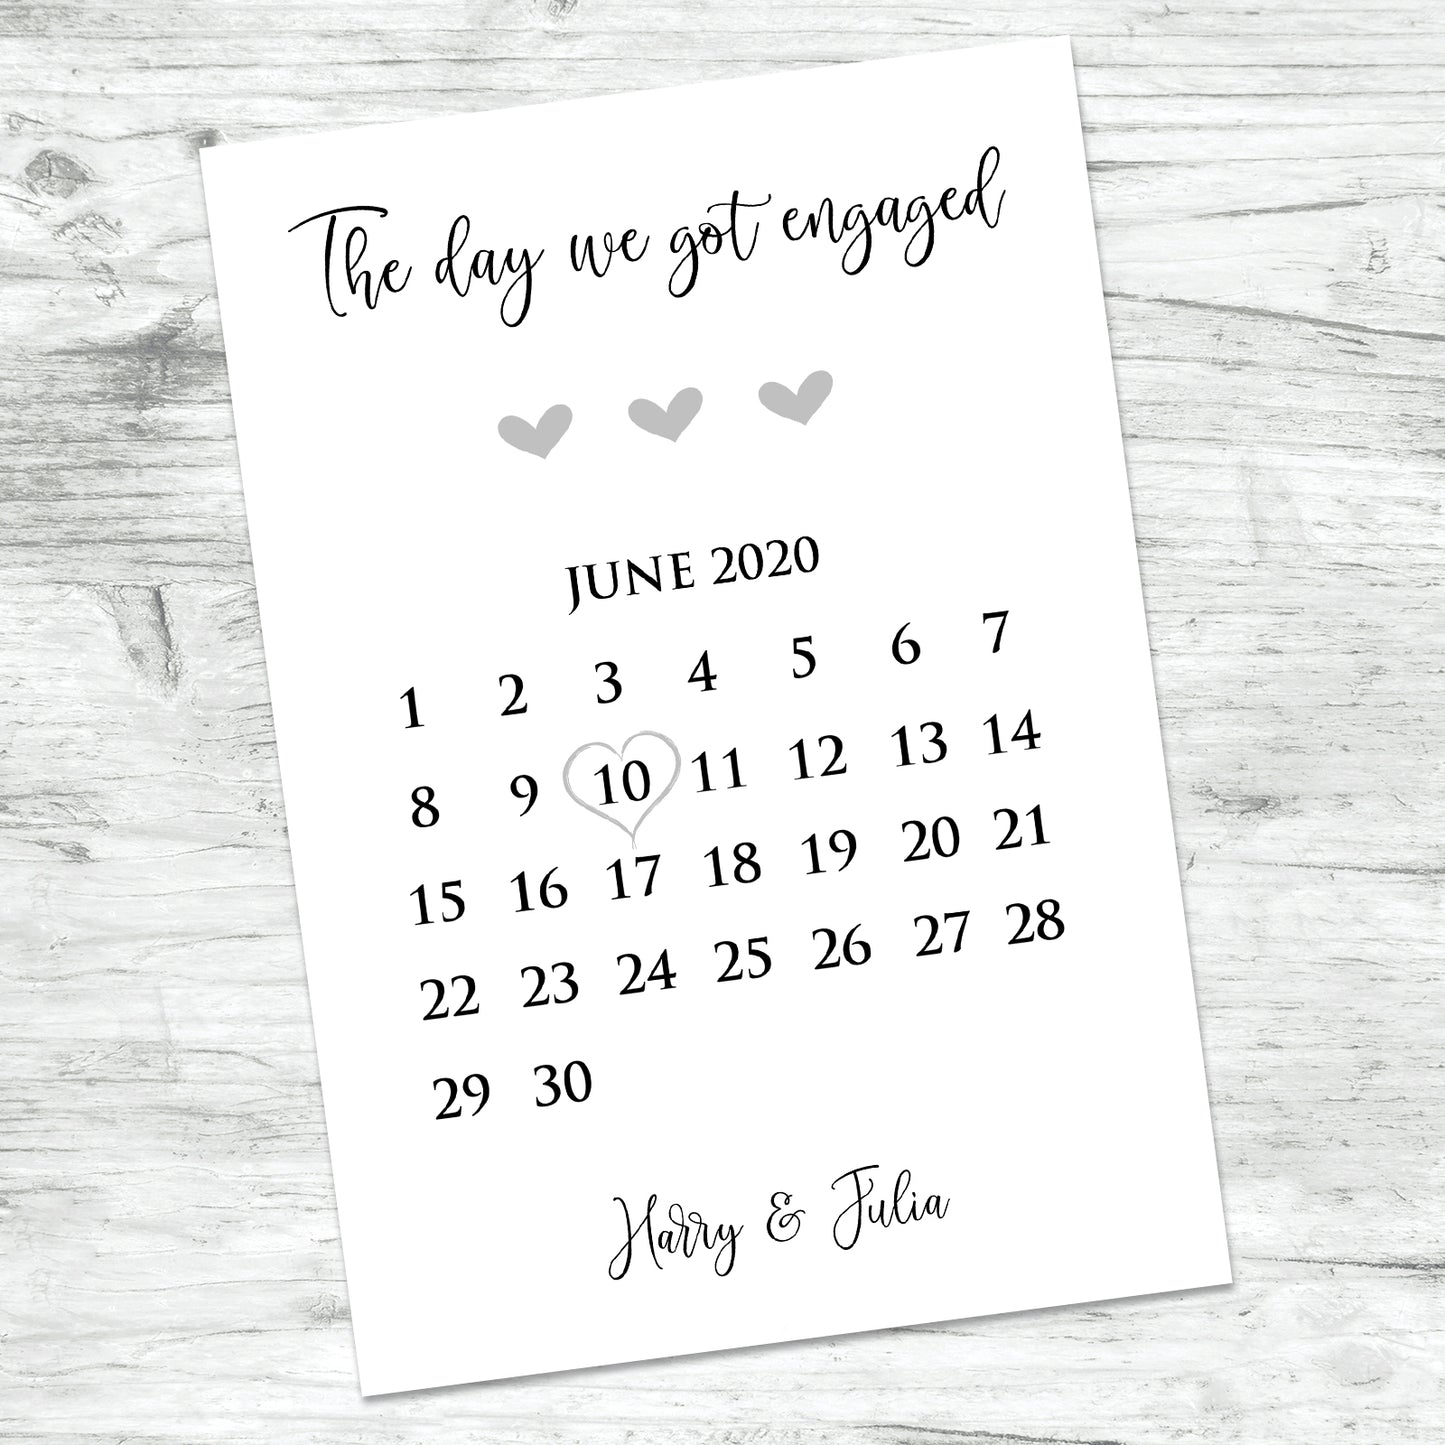 Personalised The Day We Got Engaged Print